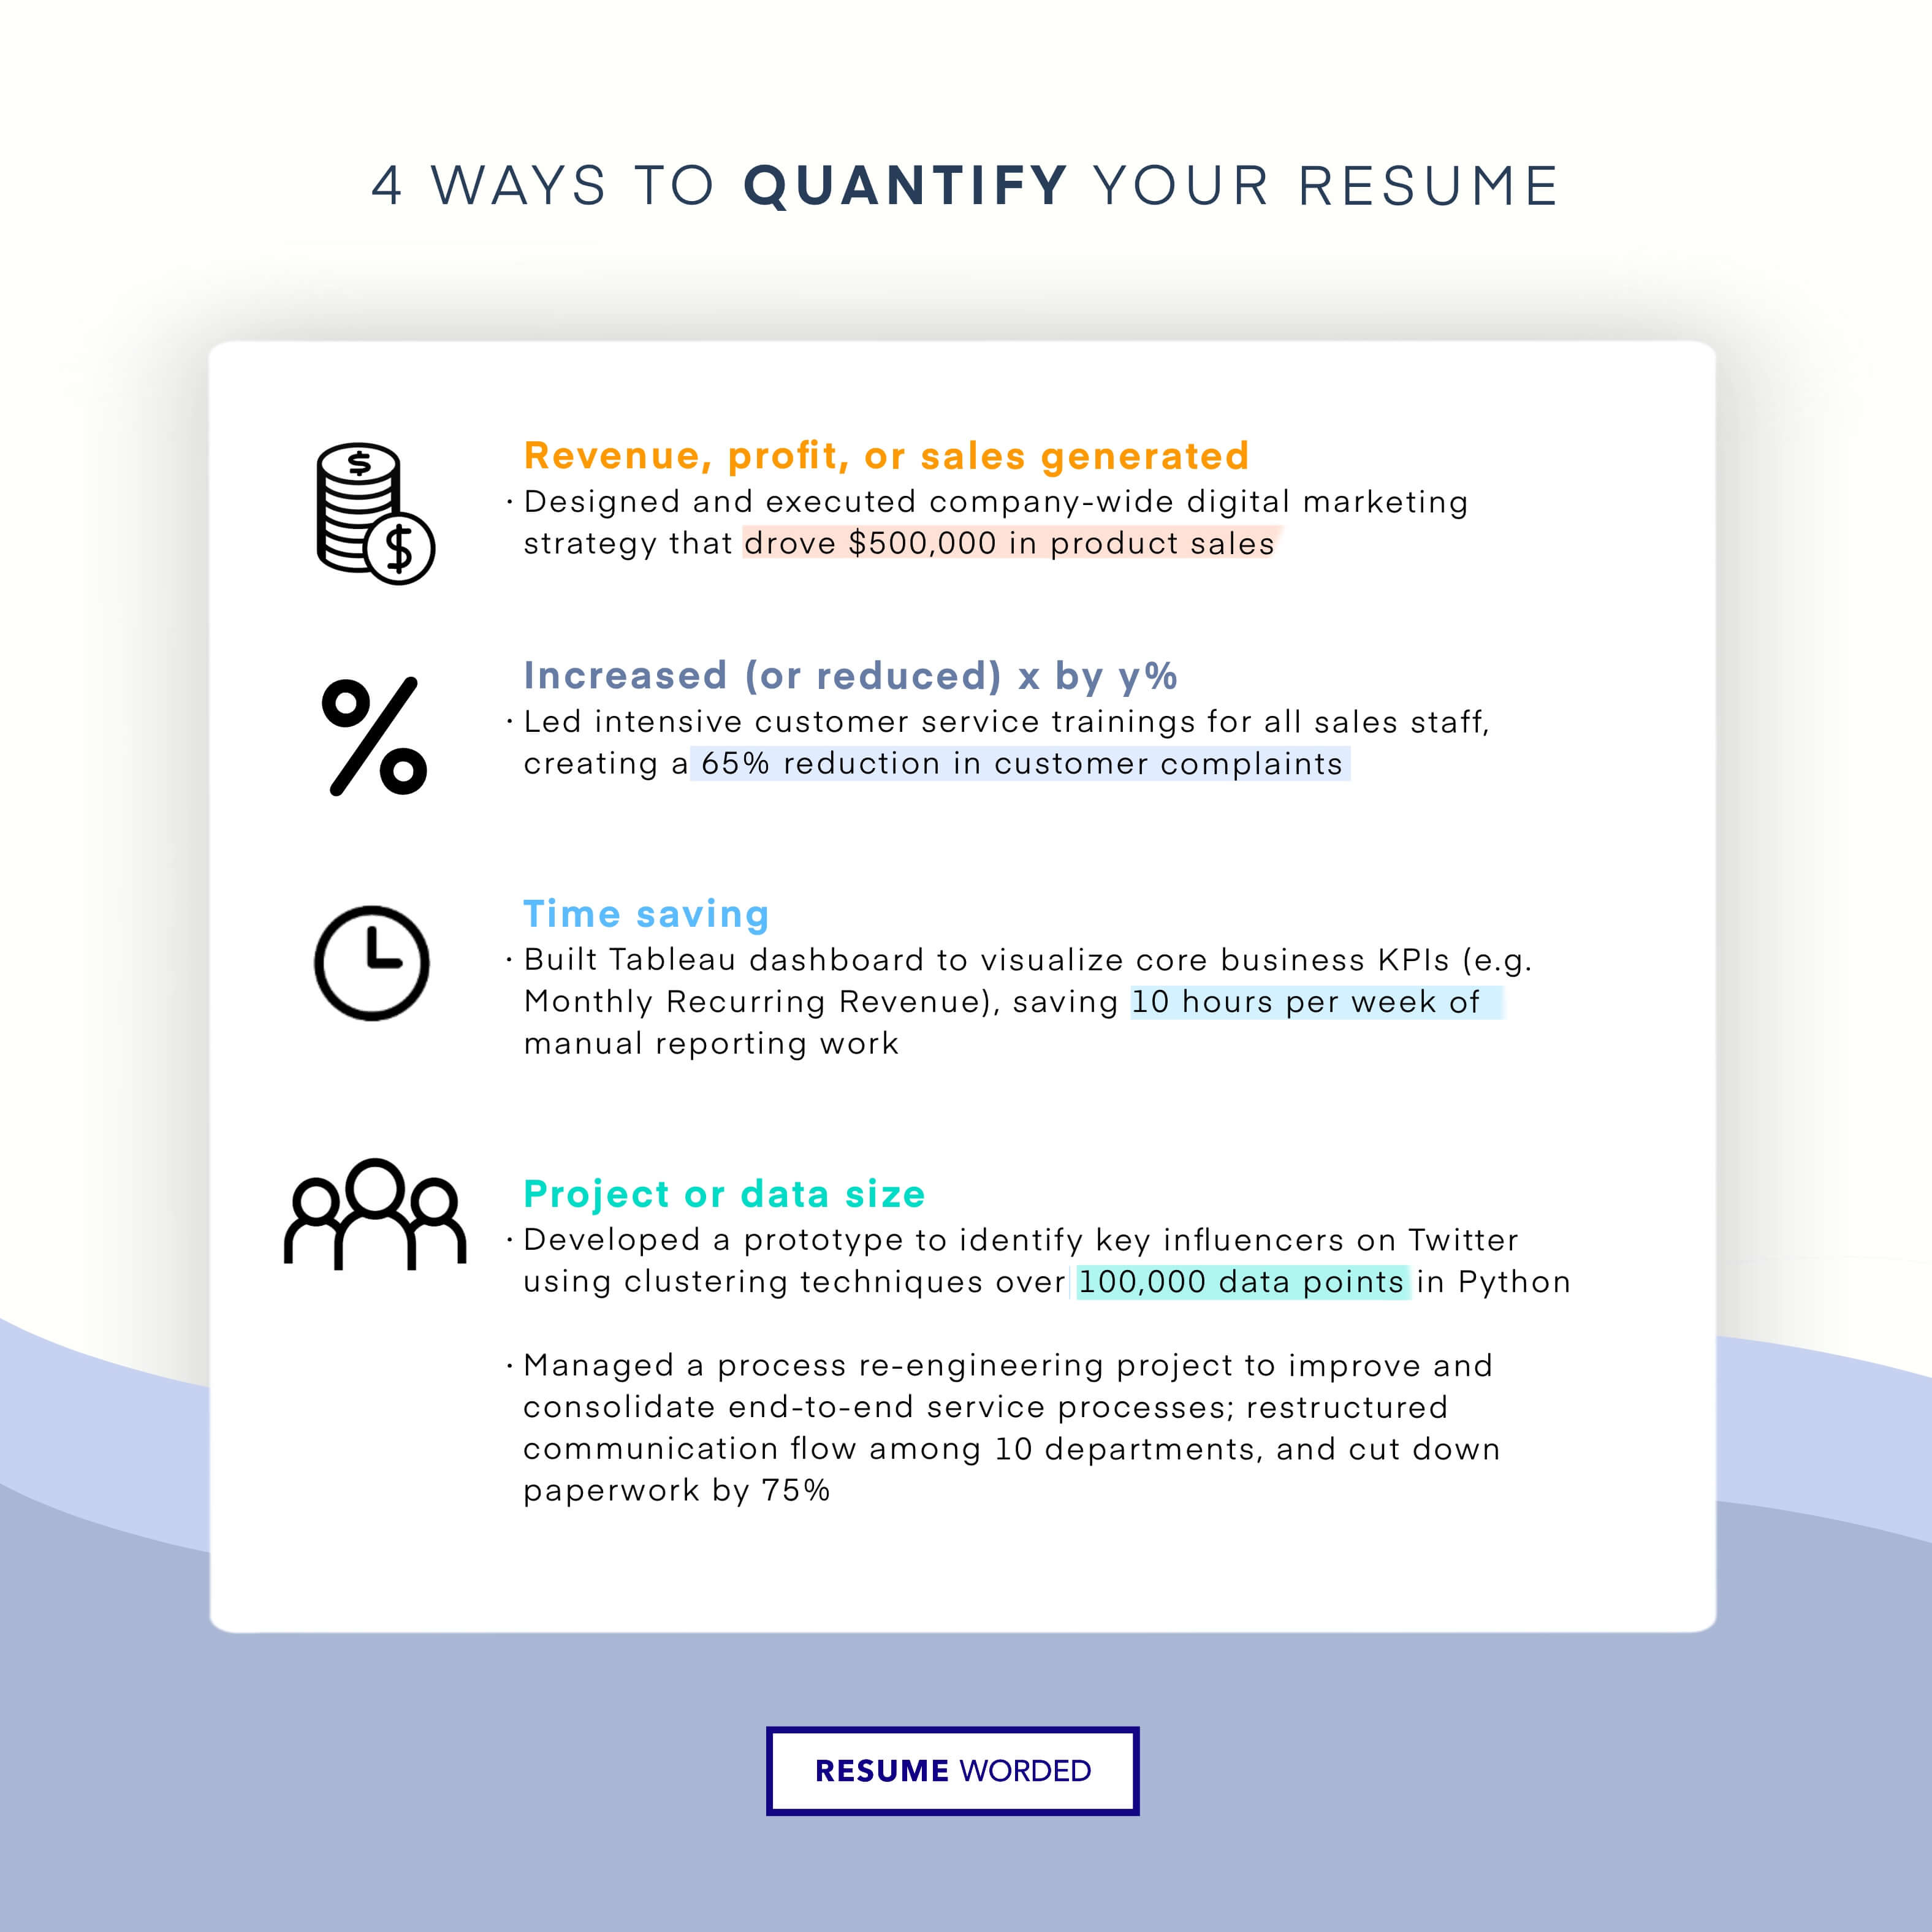 Quantify your journalistic output. - Print Journalist Resume